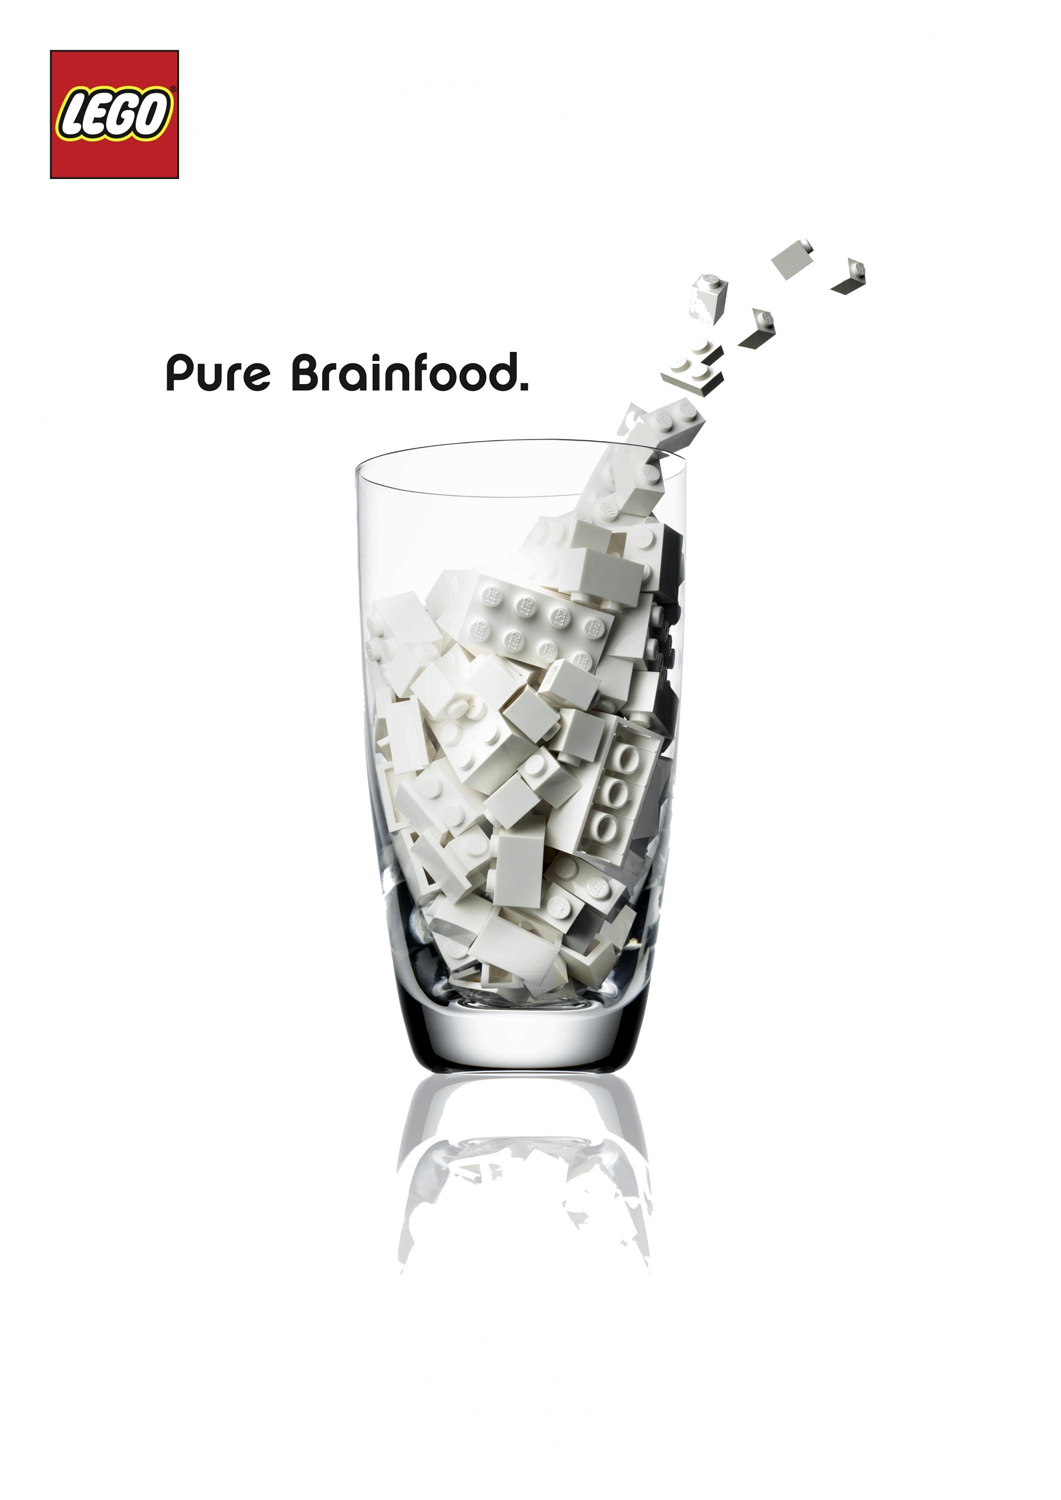  LEGO  Pure Brainfood  Ad Campaign Fonts In Use